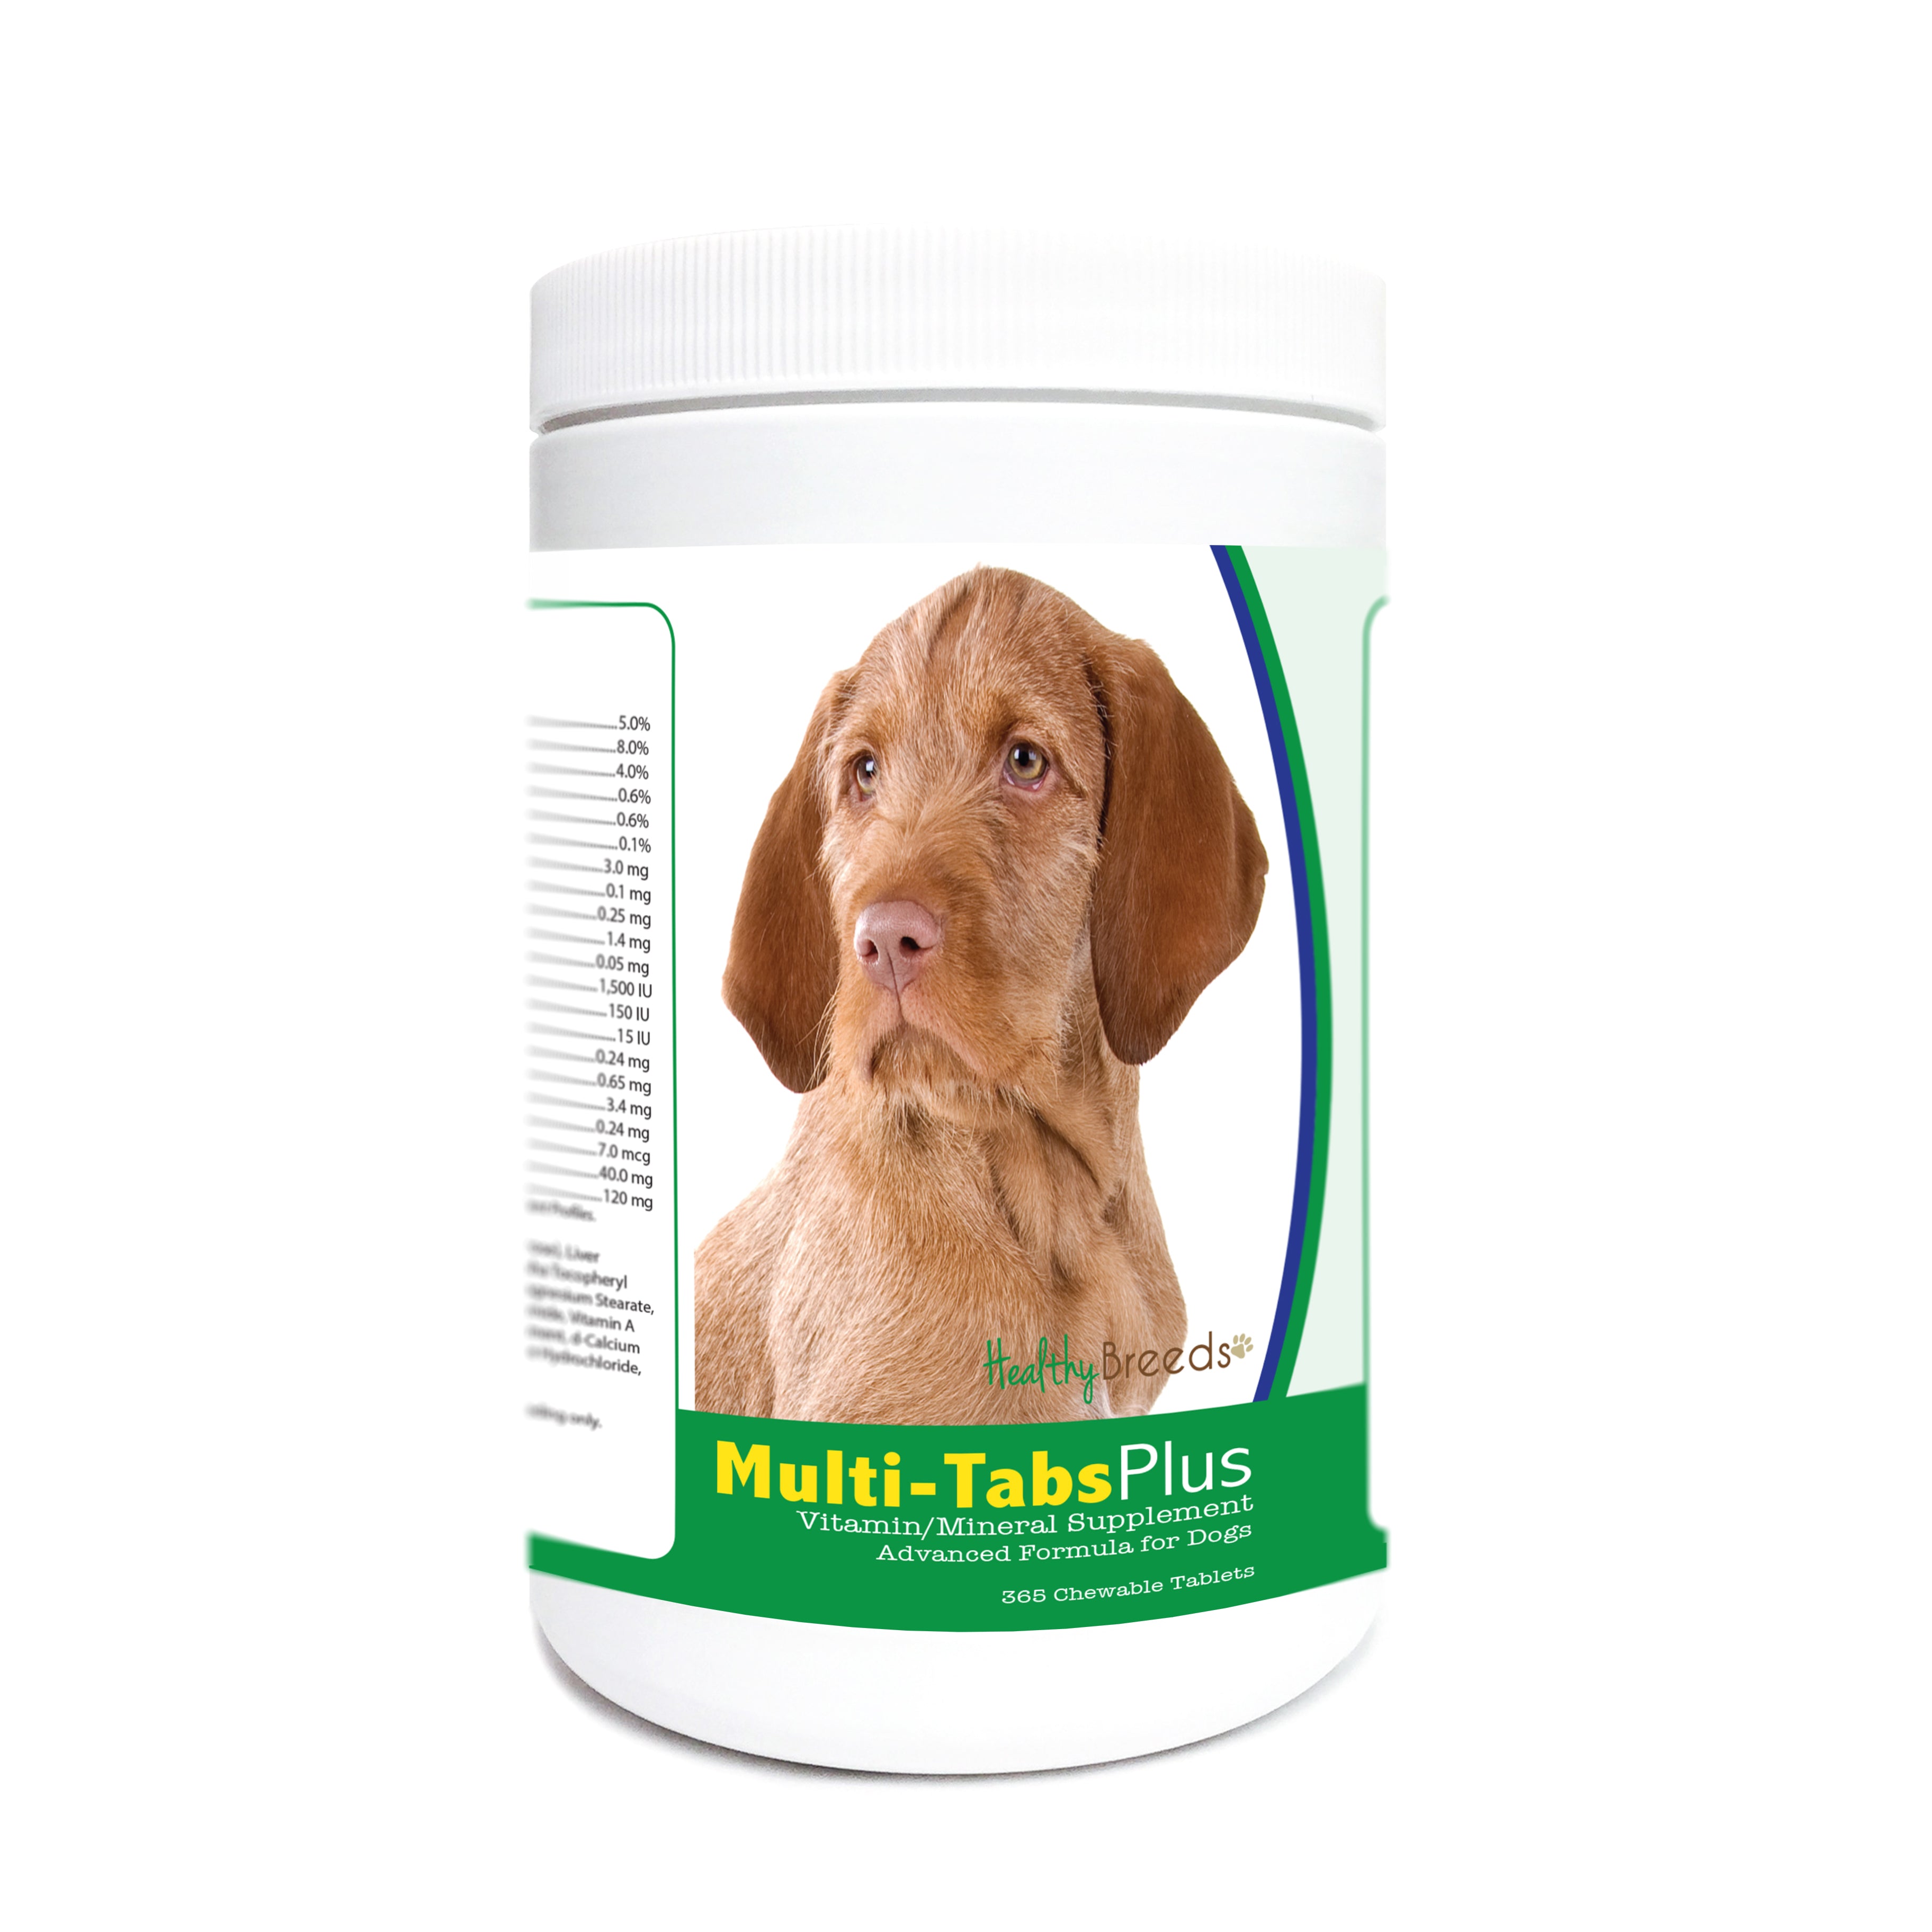 Wirehaired Vizsla Multi-Tabs Plus Chewable Tablets 365 Count